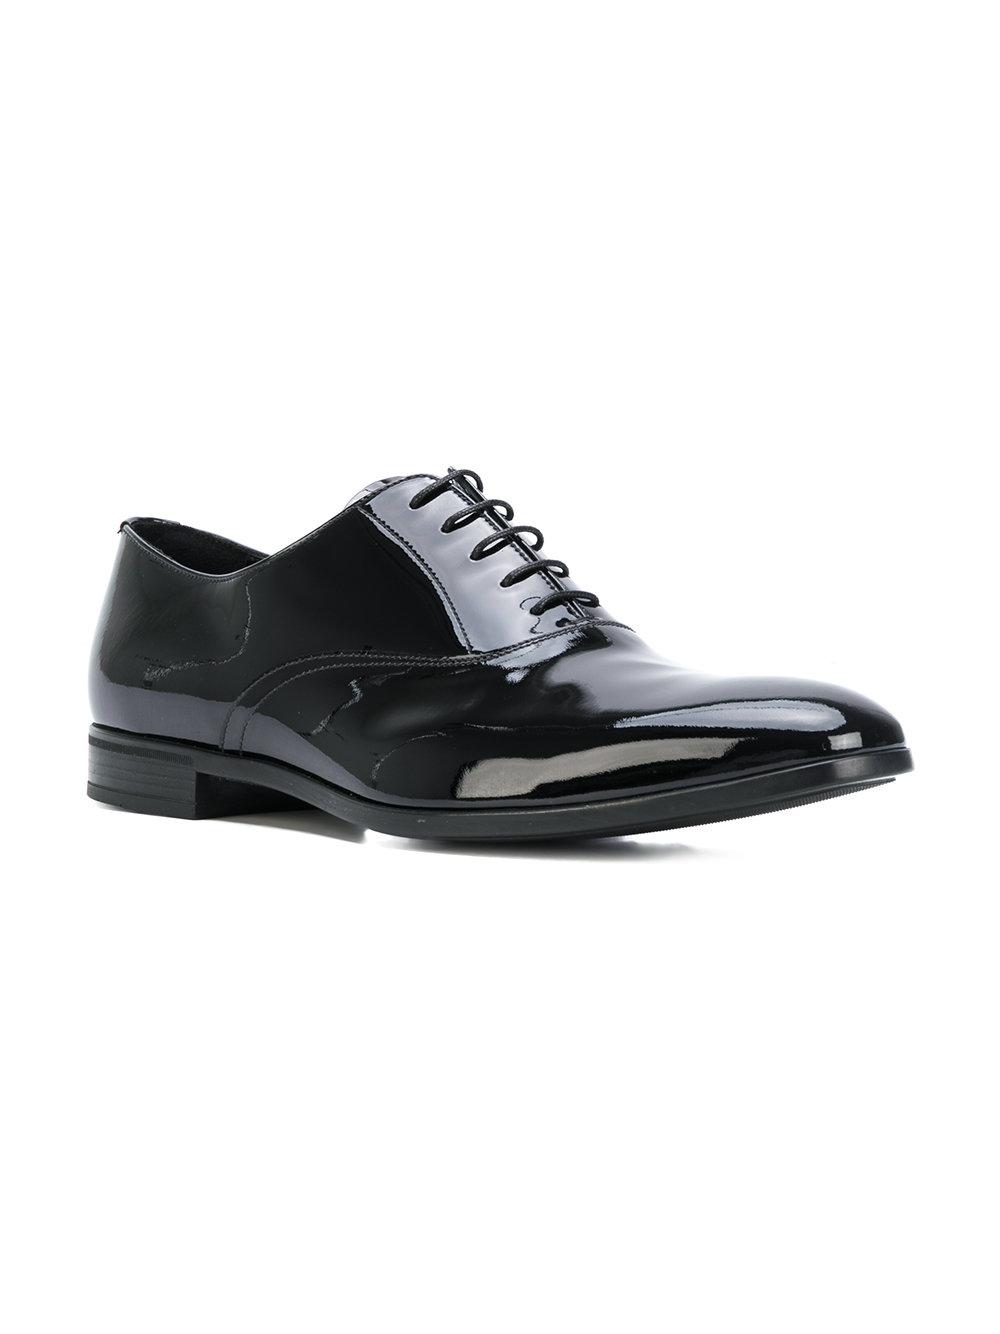 Lyst - Prada Patent Leather Lace-up Shoes in Black for Men